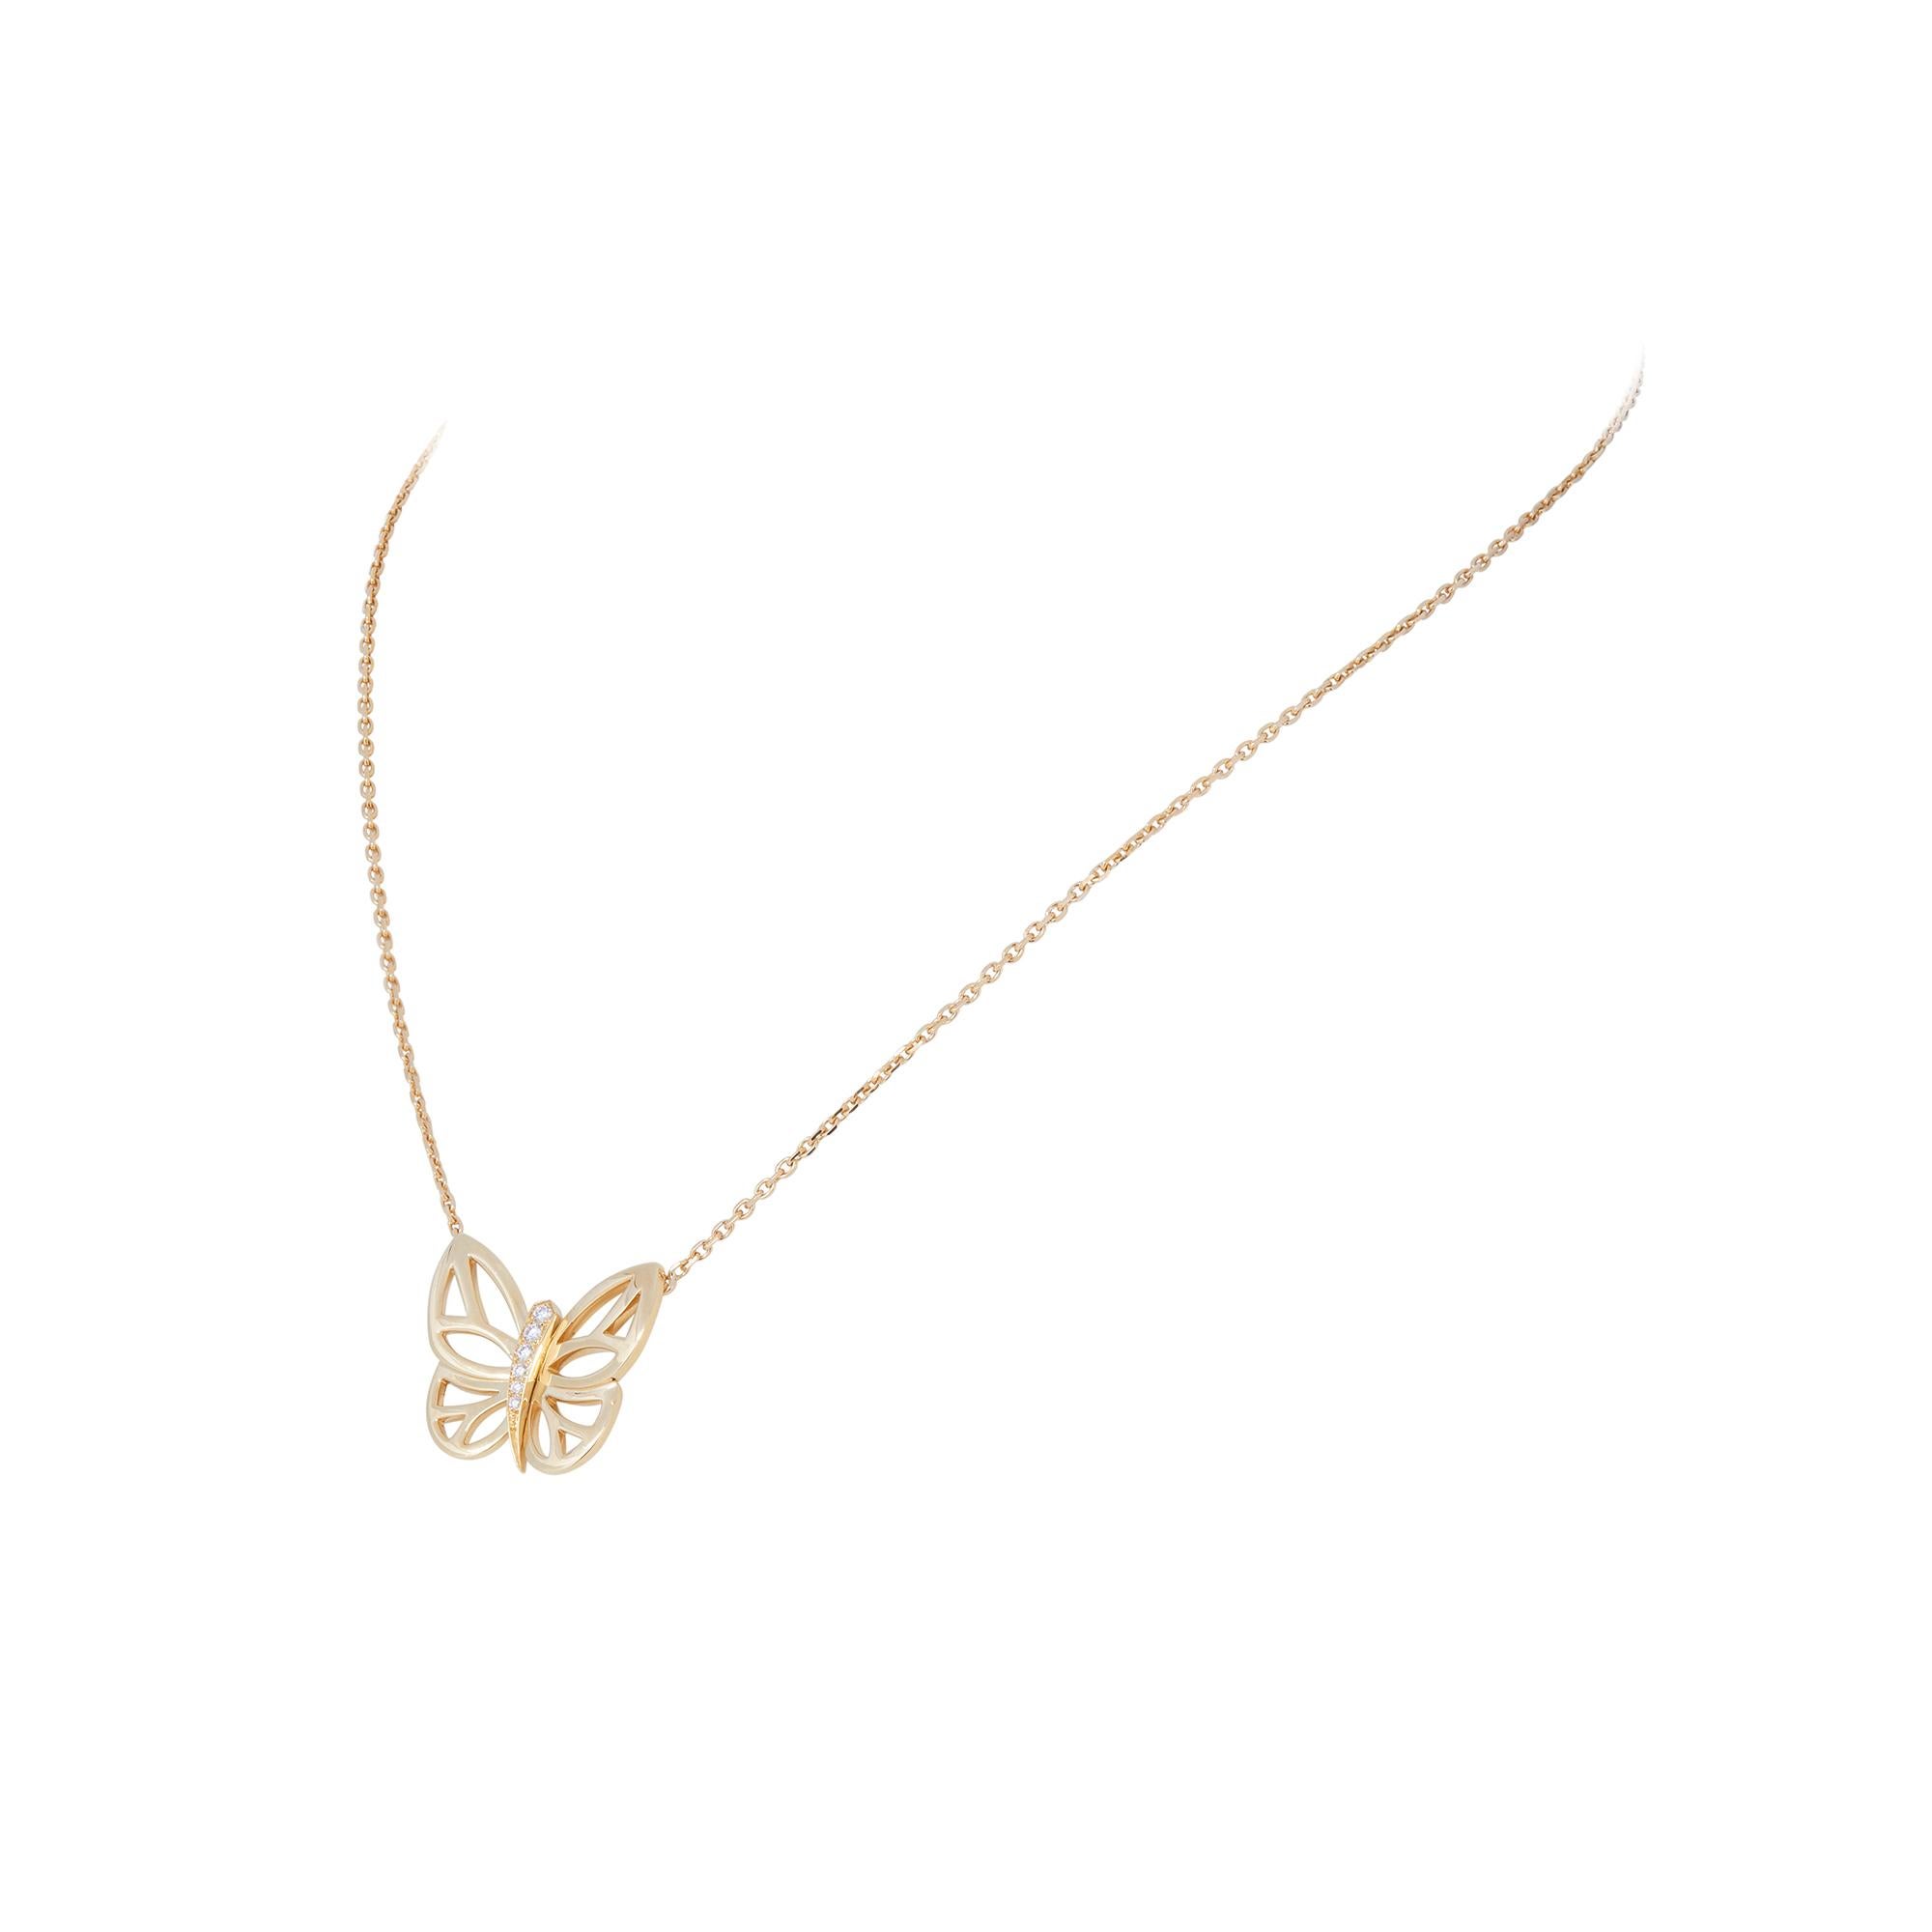 Authentic Van Cleef & Arpels Butterfly pendant necklace crafted in 18 karat yellow gold.  The body of the butterfly is set with 6 round brilliant cut diamonds of approximately 0.10 total carats.  The pendant is situated on a 16 3/4 inch adjustable